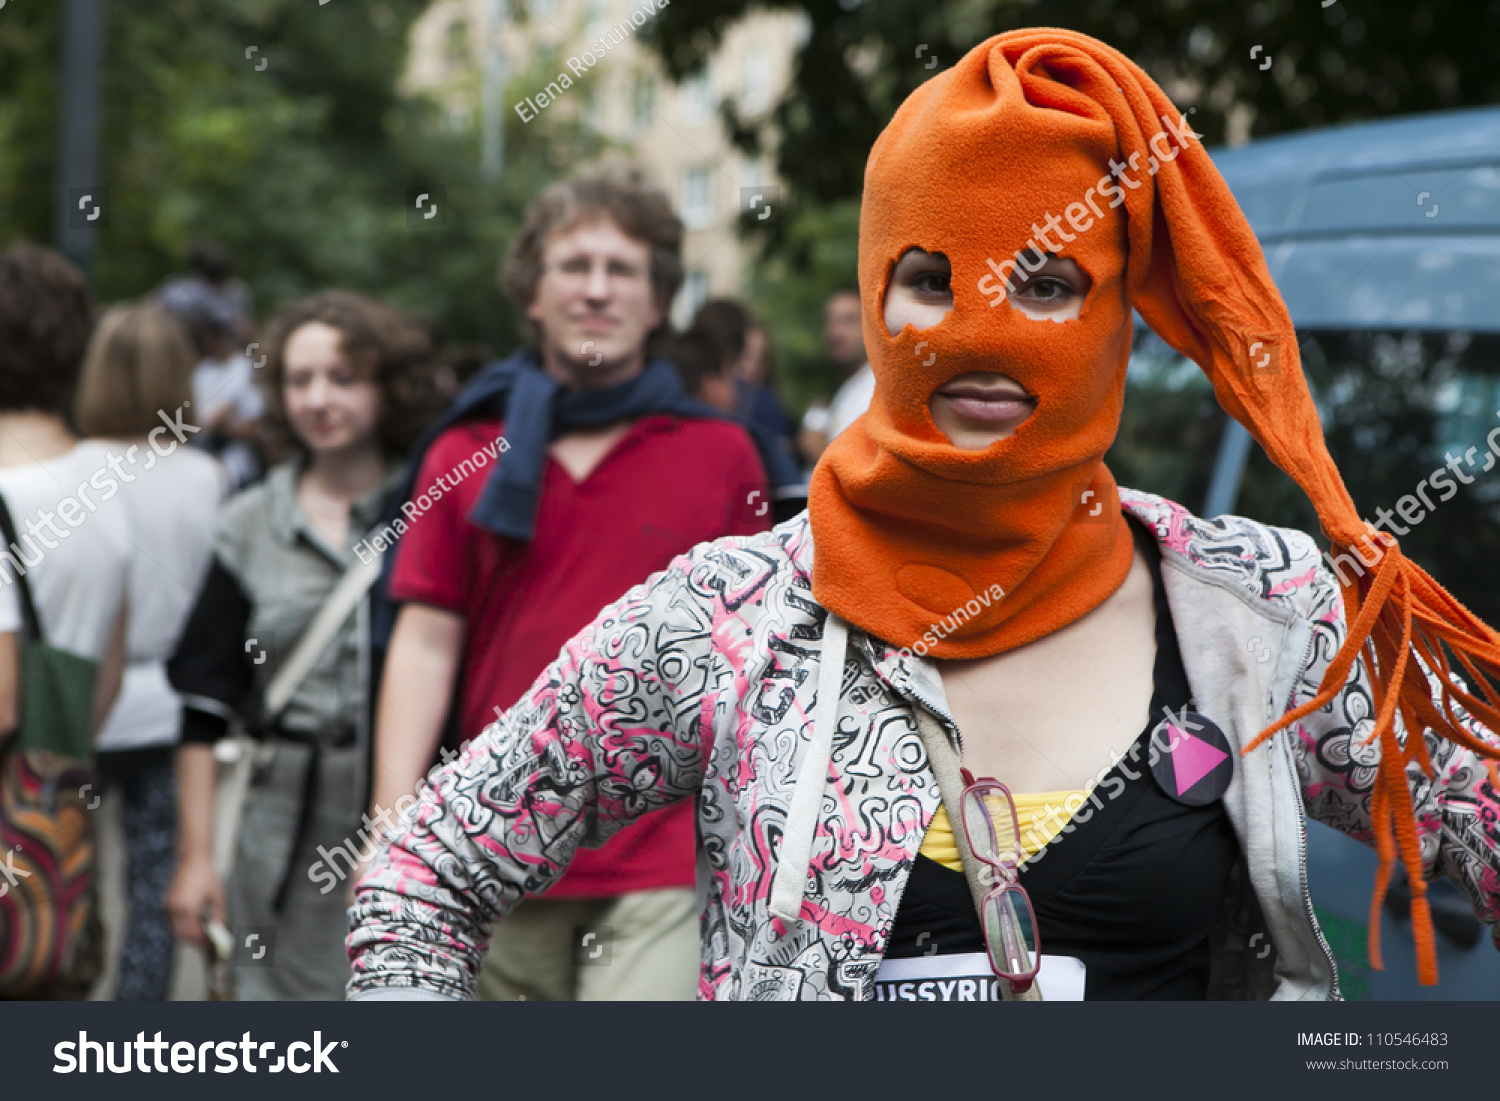 Moscow Russia August 17 Protestant Wears Orange Balaclava Pussy Riot Outside Court To